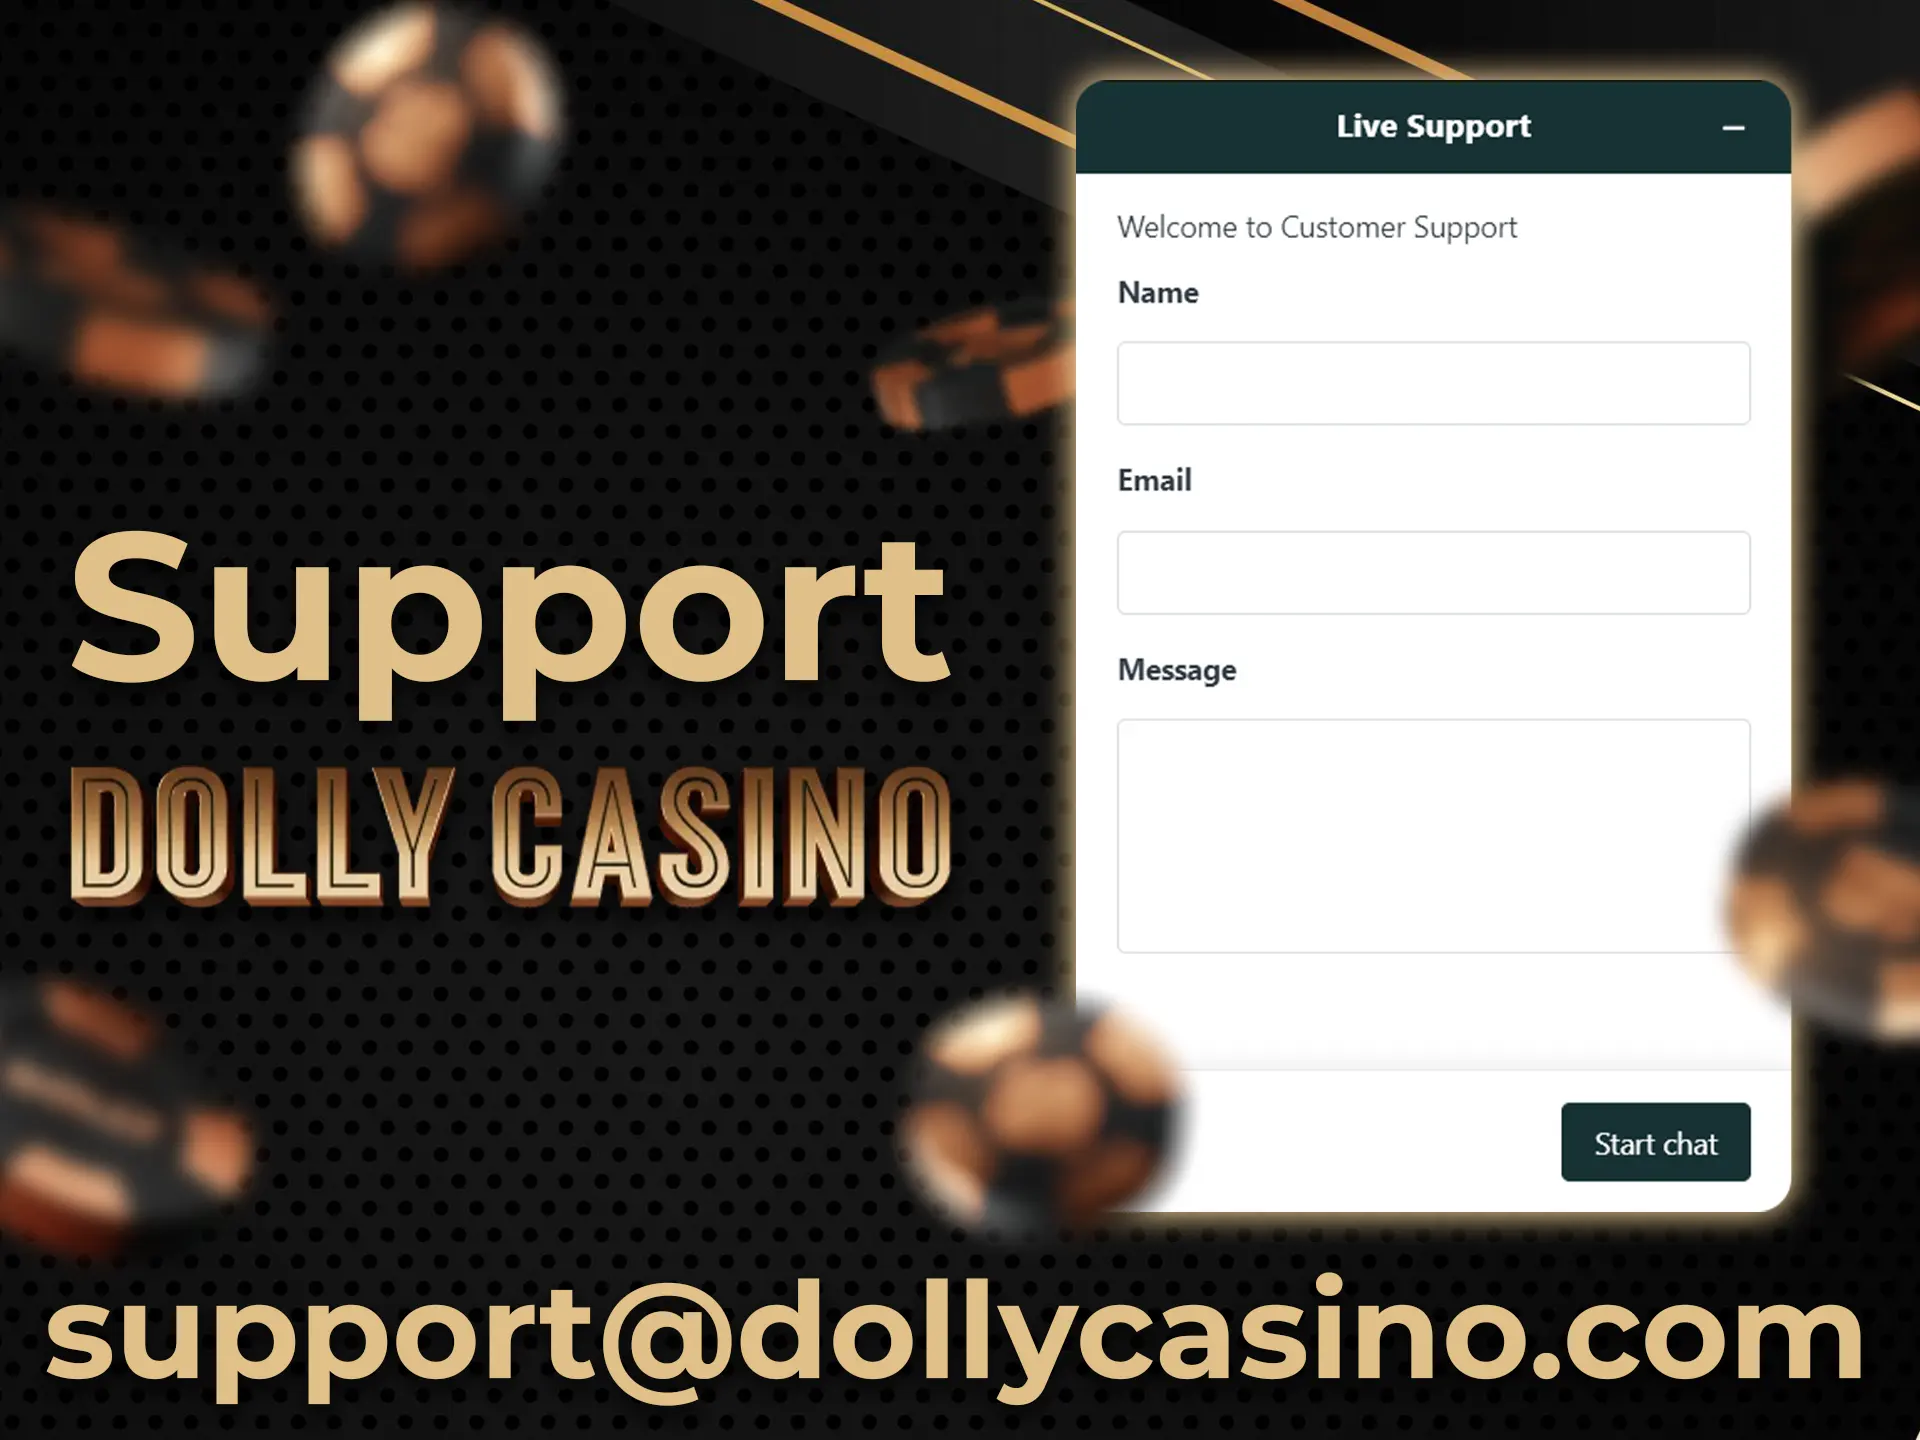 You can contact Dolly's support team via online chat or email.